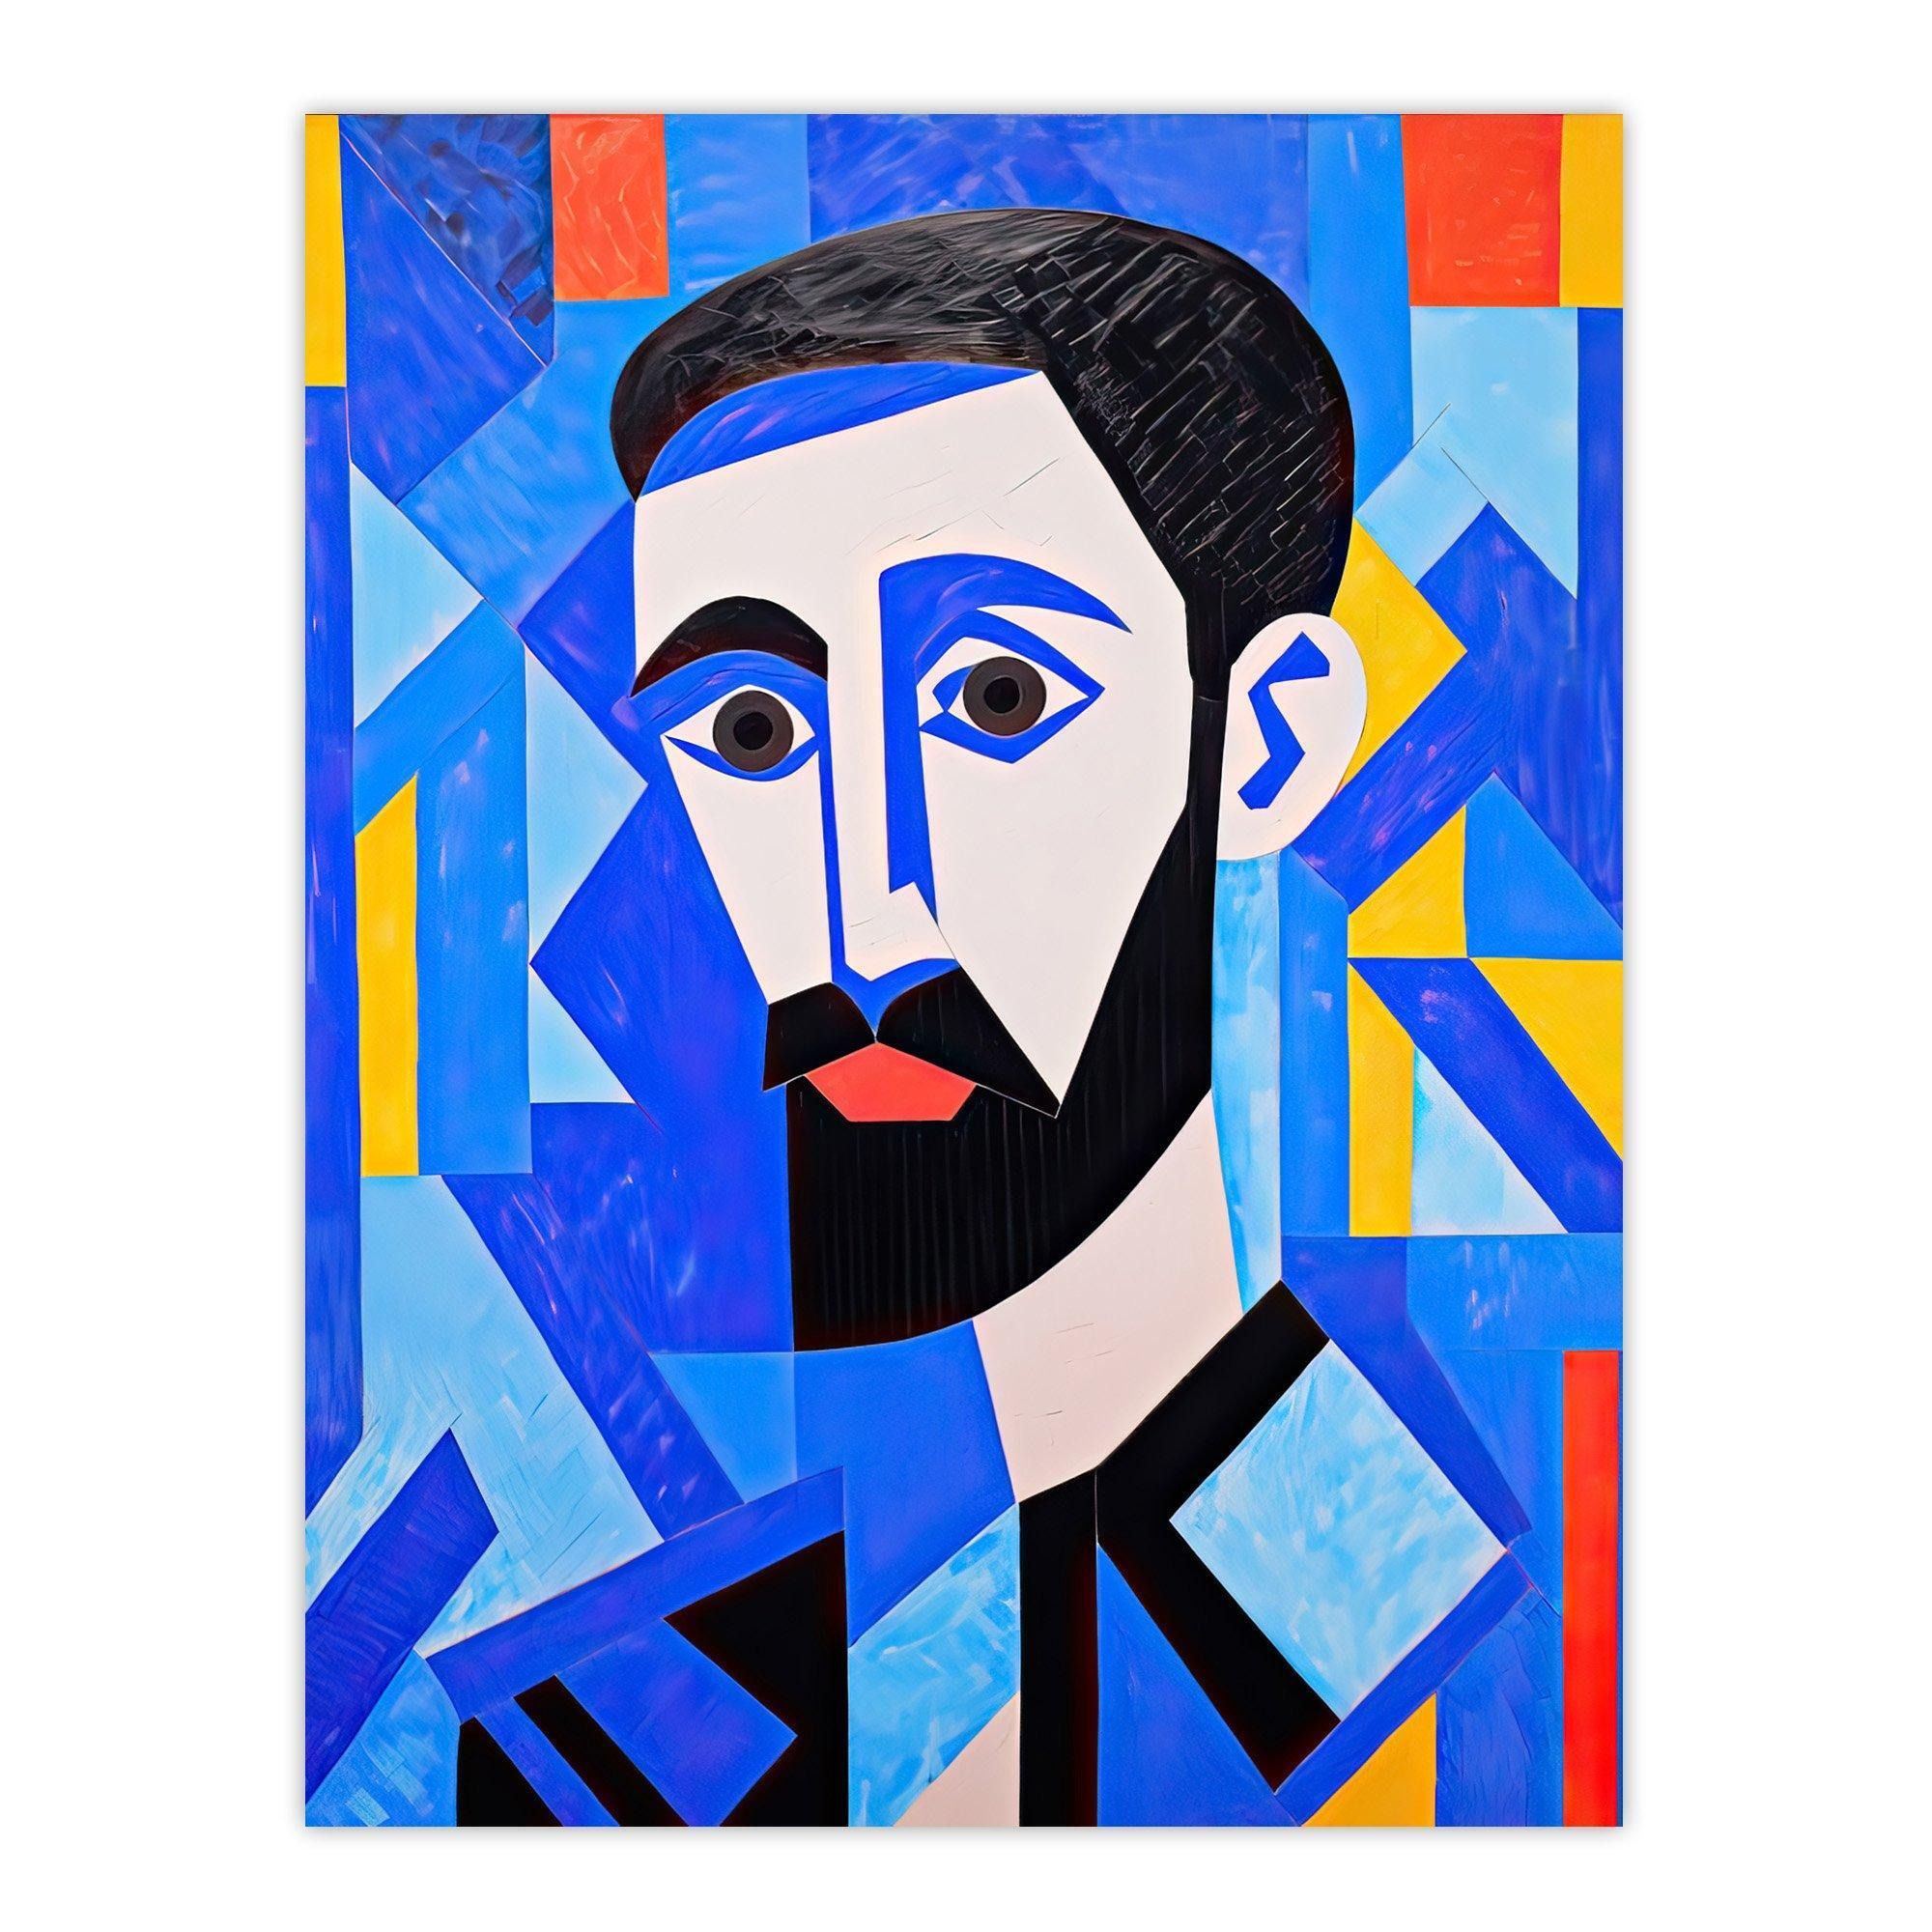 Blue Man Vibrant Abstract Oil Painting Young Male with Beard Cubist Portrait Unframed Wall Art Print Poster Home Decor Premium - image 1